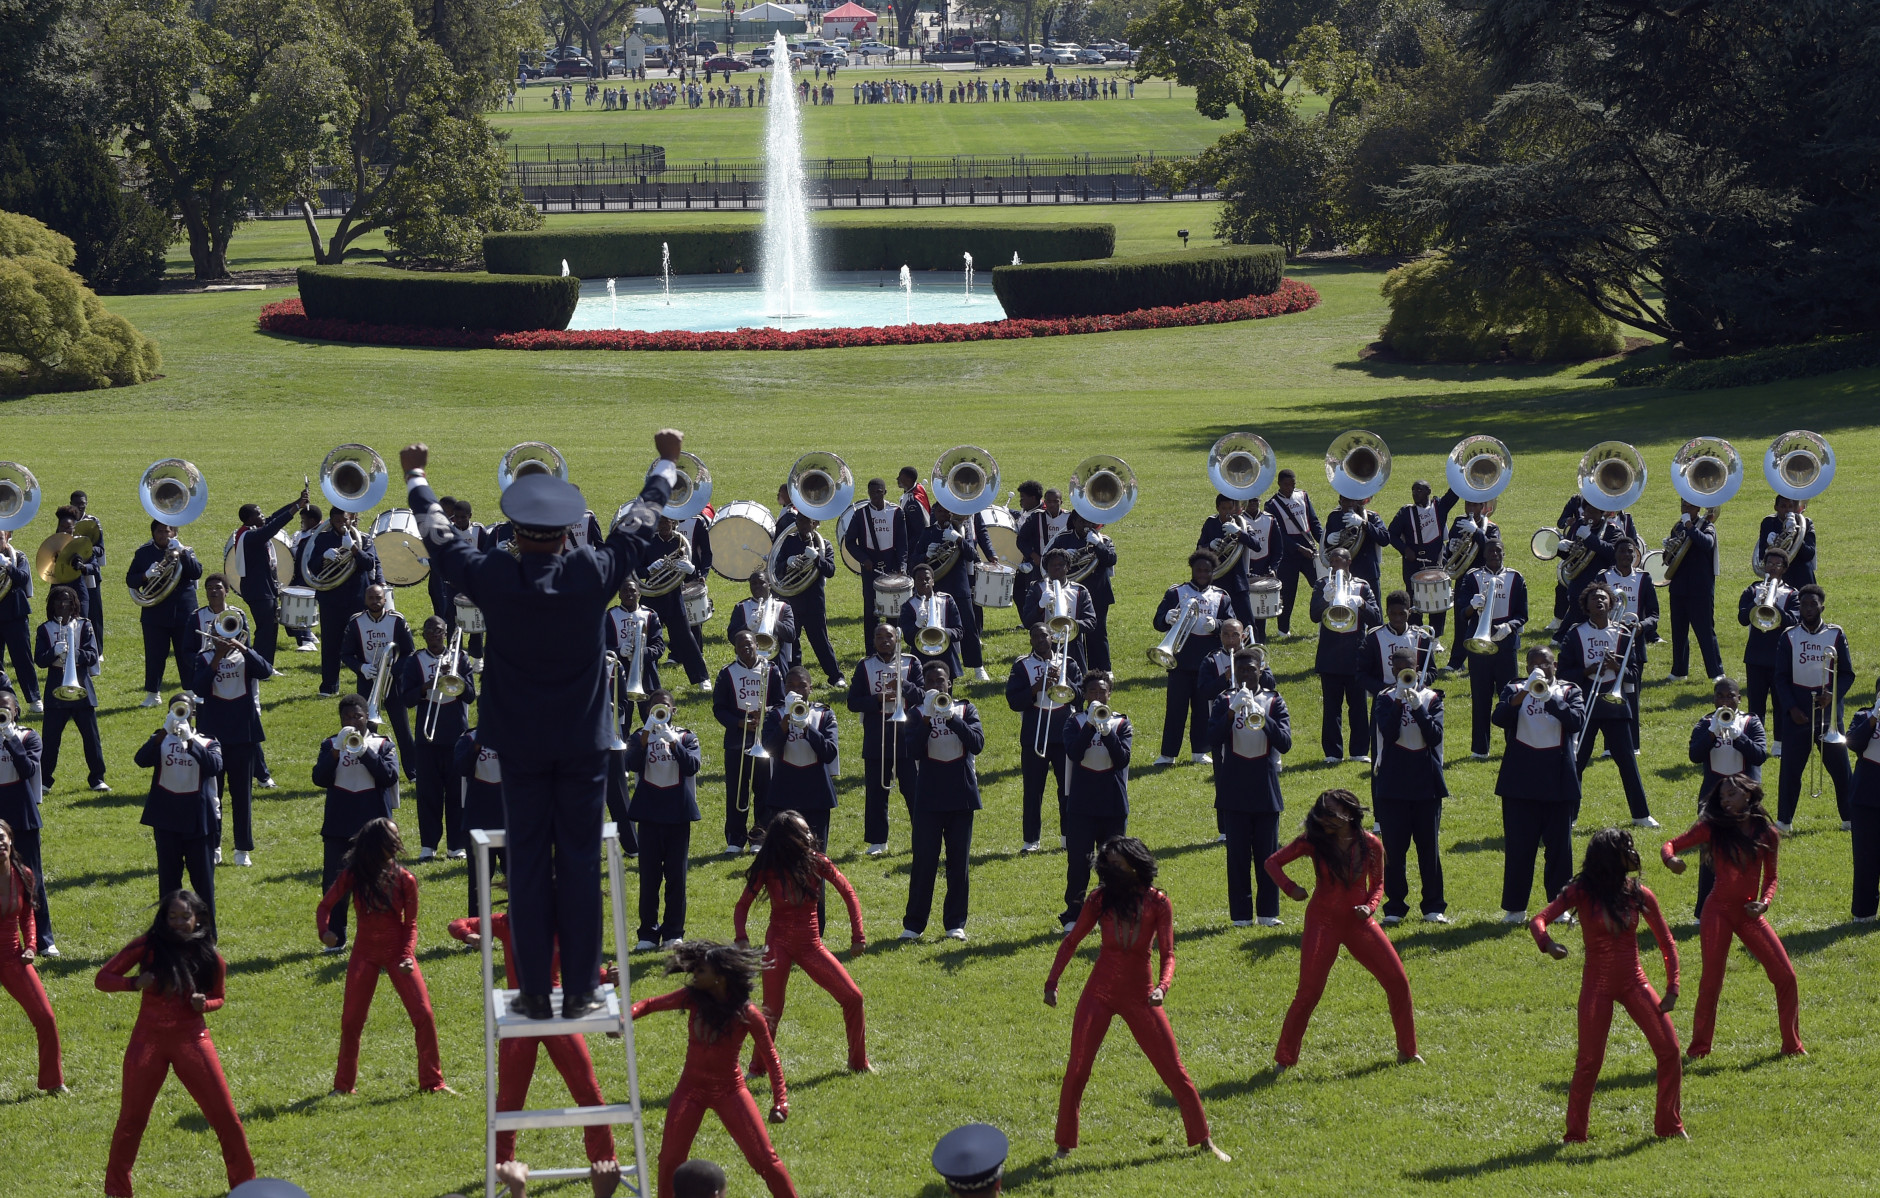 The Tennessee State University Marching band performs on the South Lawn of the White House in Washington, Friday, Sept. 23, 2016, as part of the entertainment for a reception at the White House for the opening of the Smithsonian's National Museum of African American History and Culture. (AP Photo/Susan Walsh)